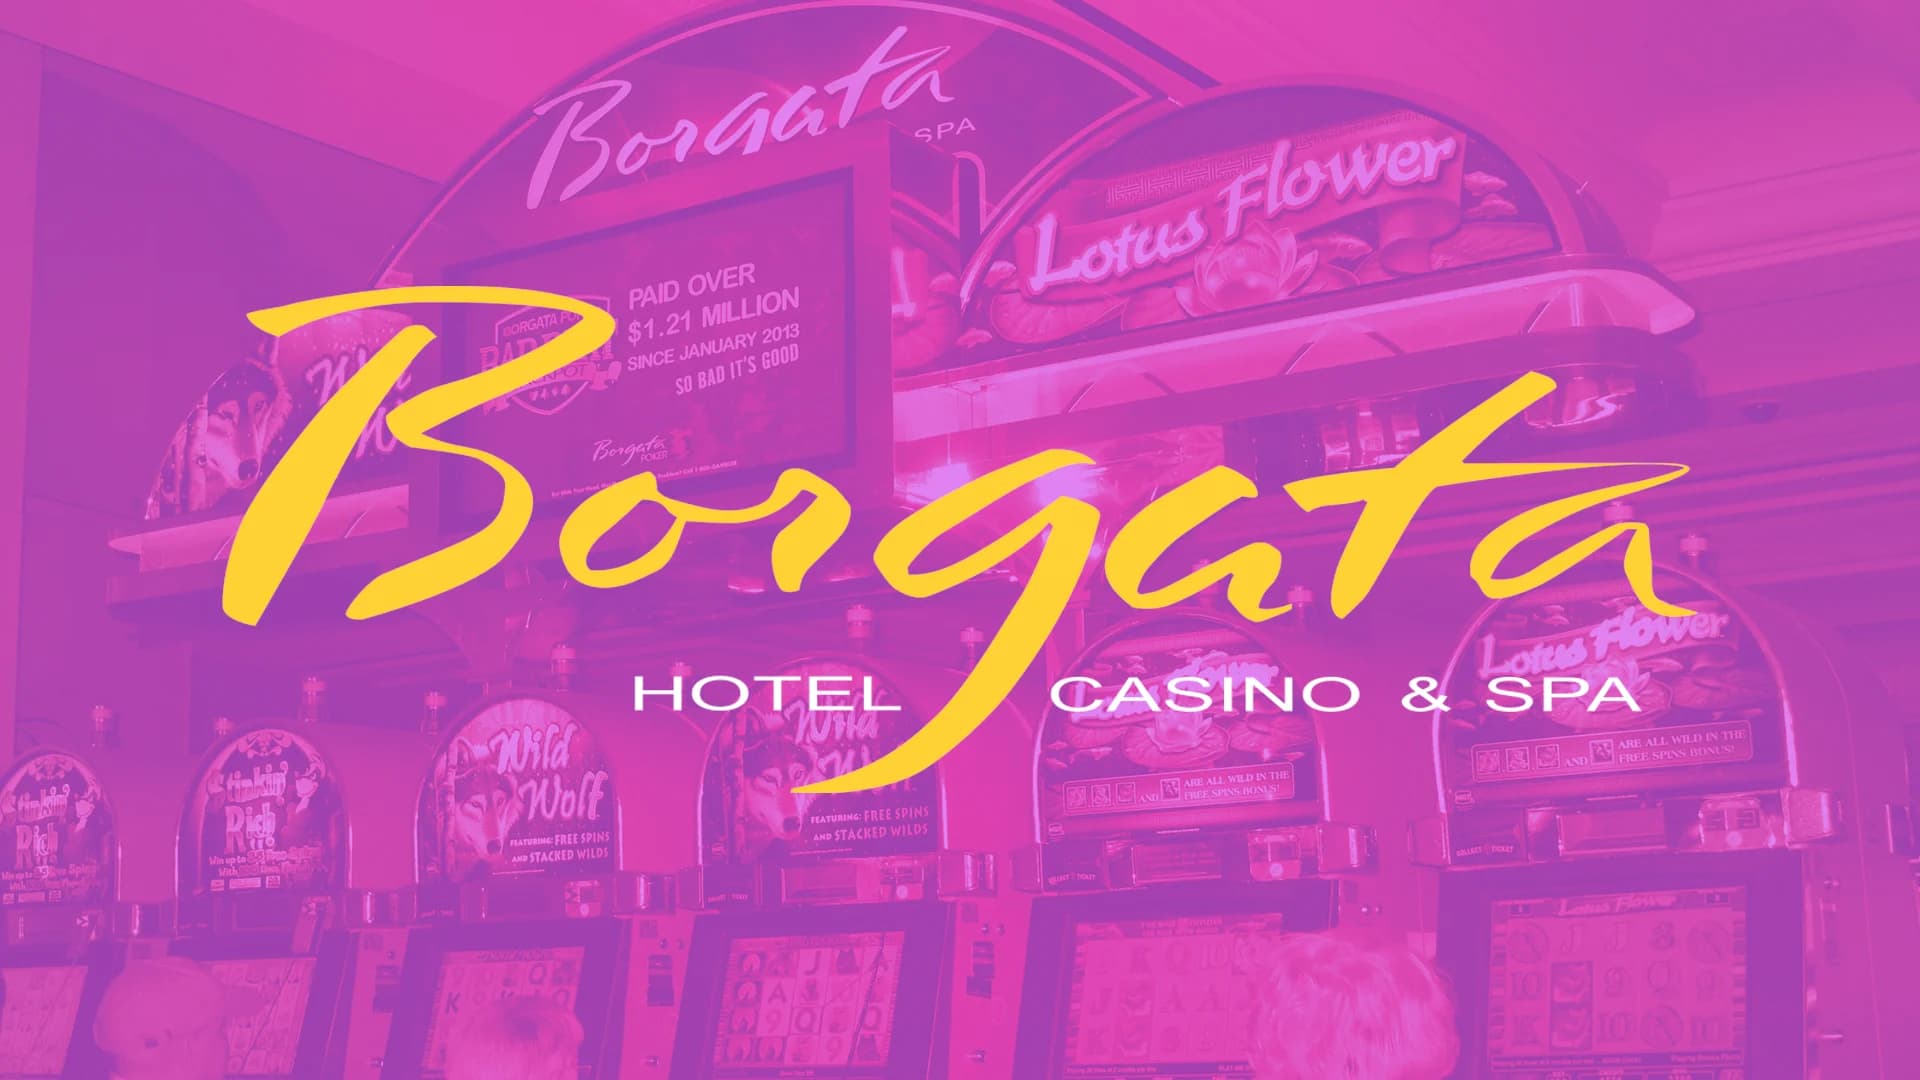 Get set to laugh! Borgata comedy club releases lineup of laughter beginning May 20